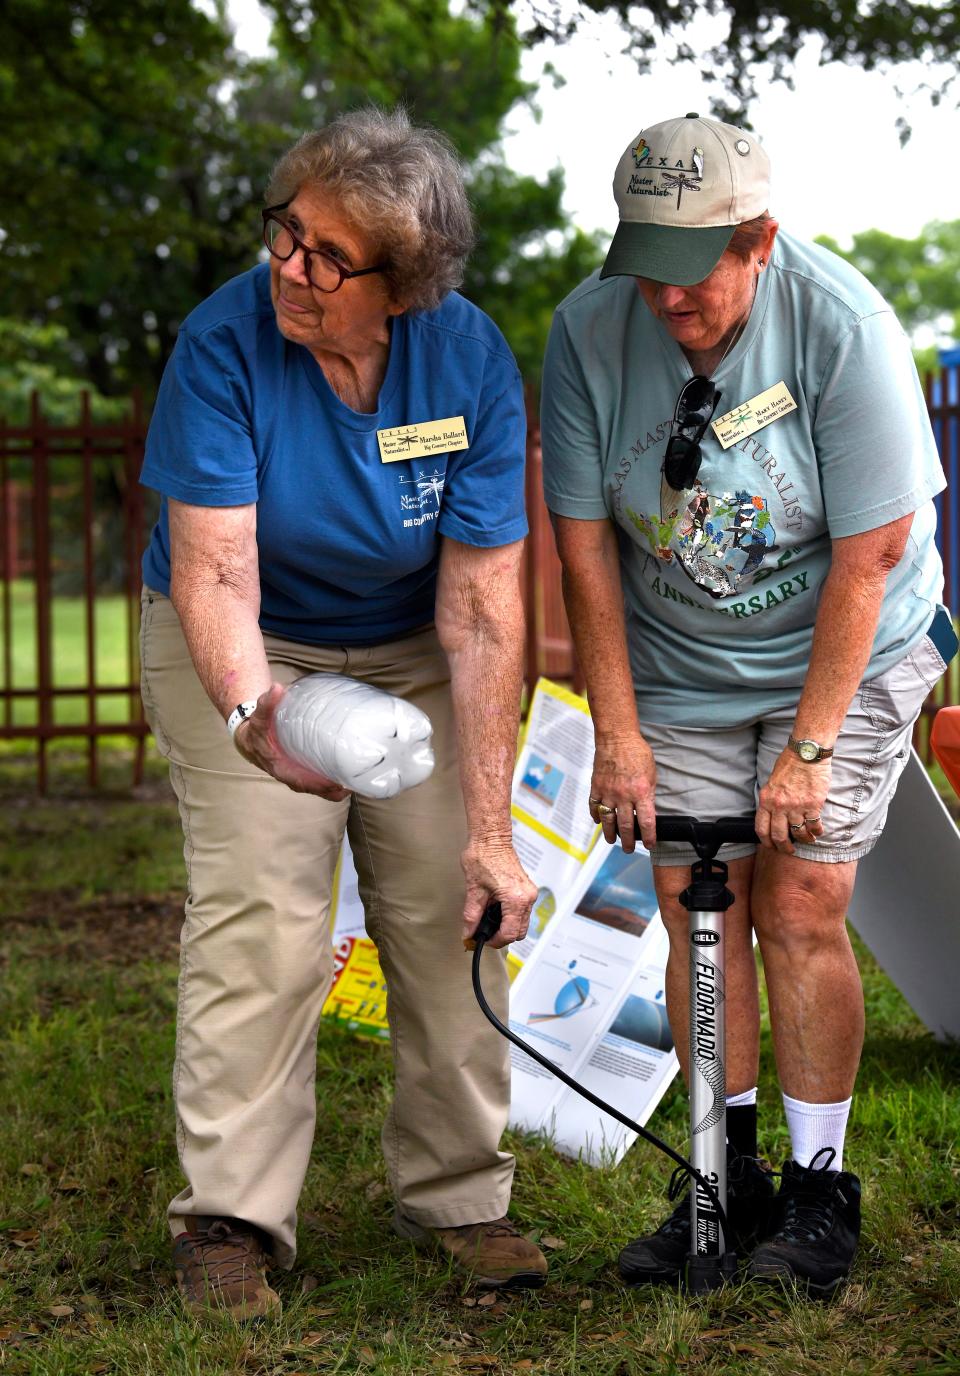 Master naturalists Marsha Ballard (left) and Mary Haney create a cloud in an otherwise empty soda bottle at Abilene State Park on June 1.  The park celebrated its 90th anniversary with games and educational activities.